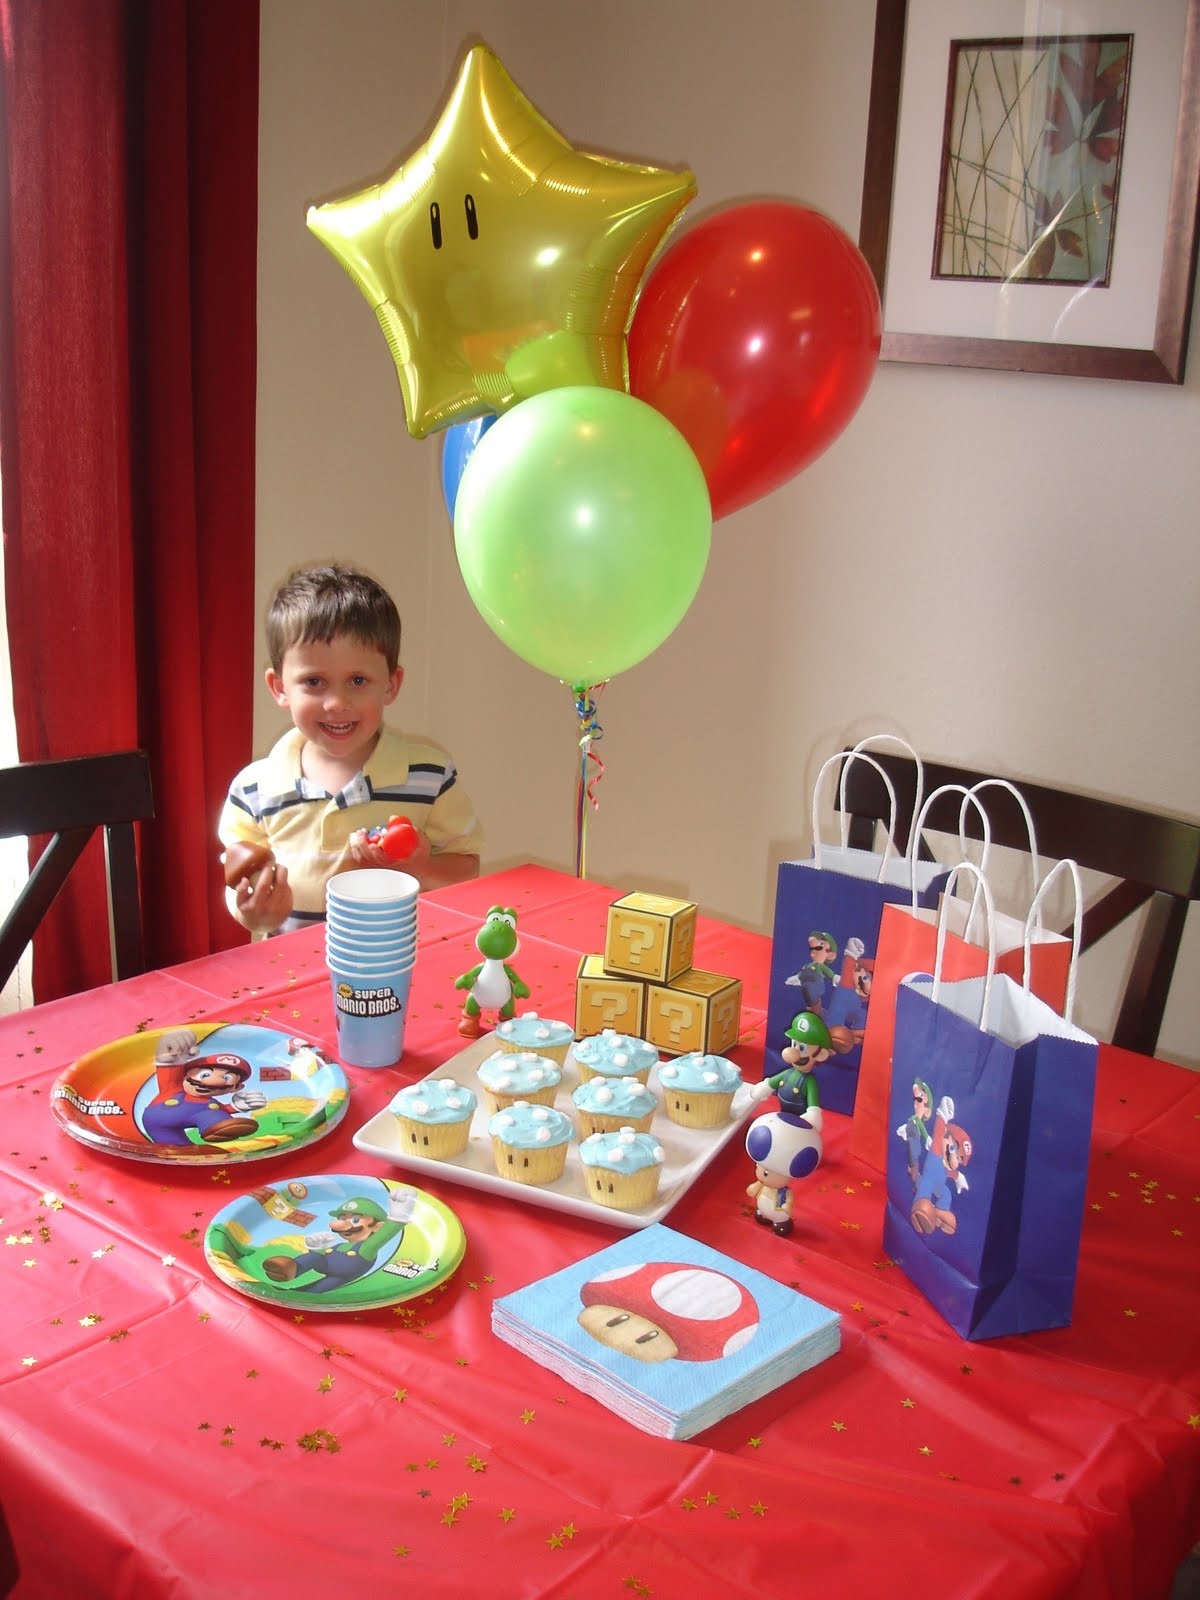 Mario Birthday Decorations
 Our Homemade Happiness Super Mario Birthday Party